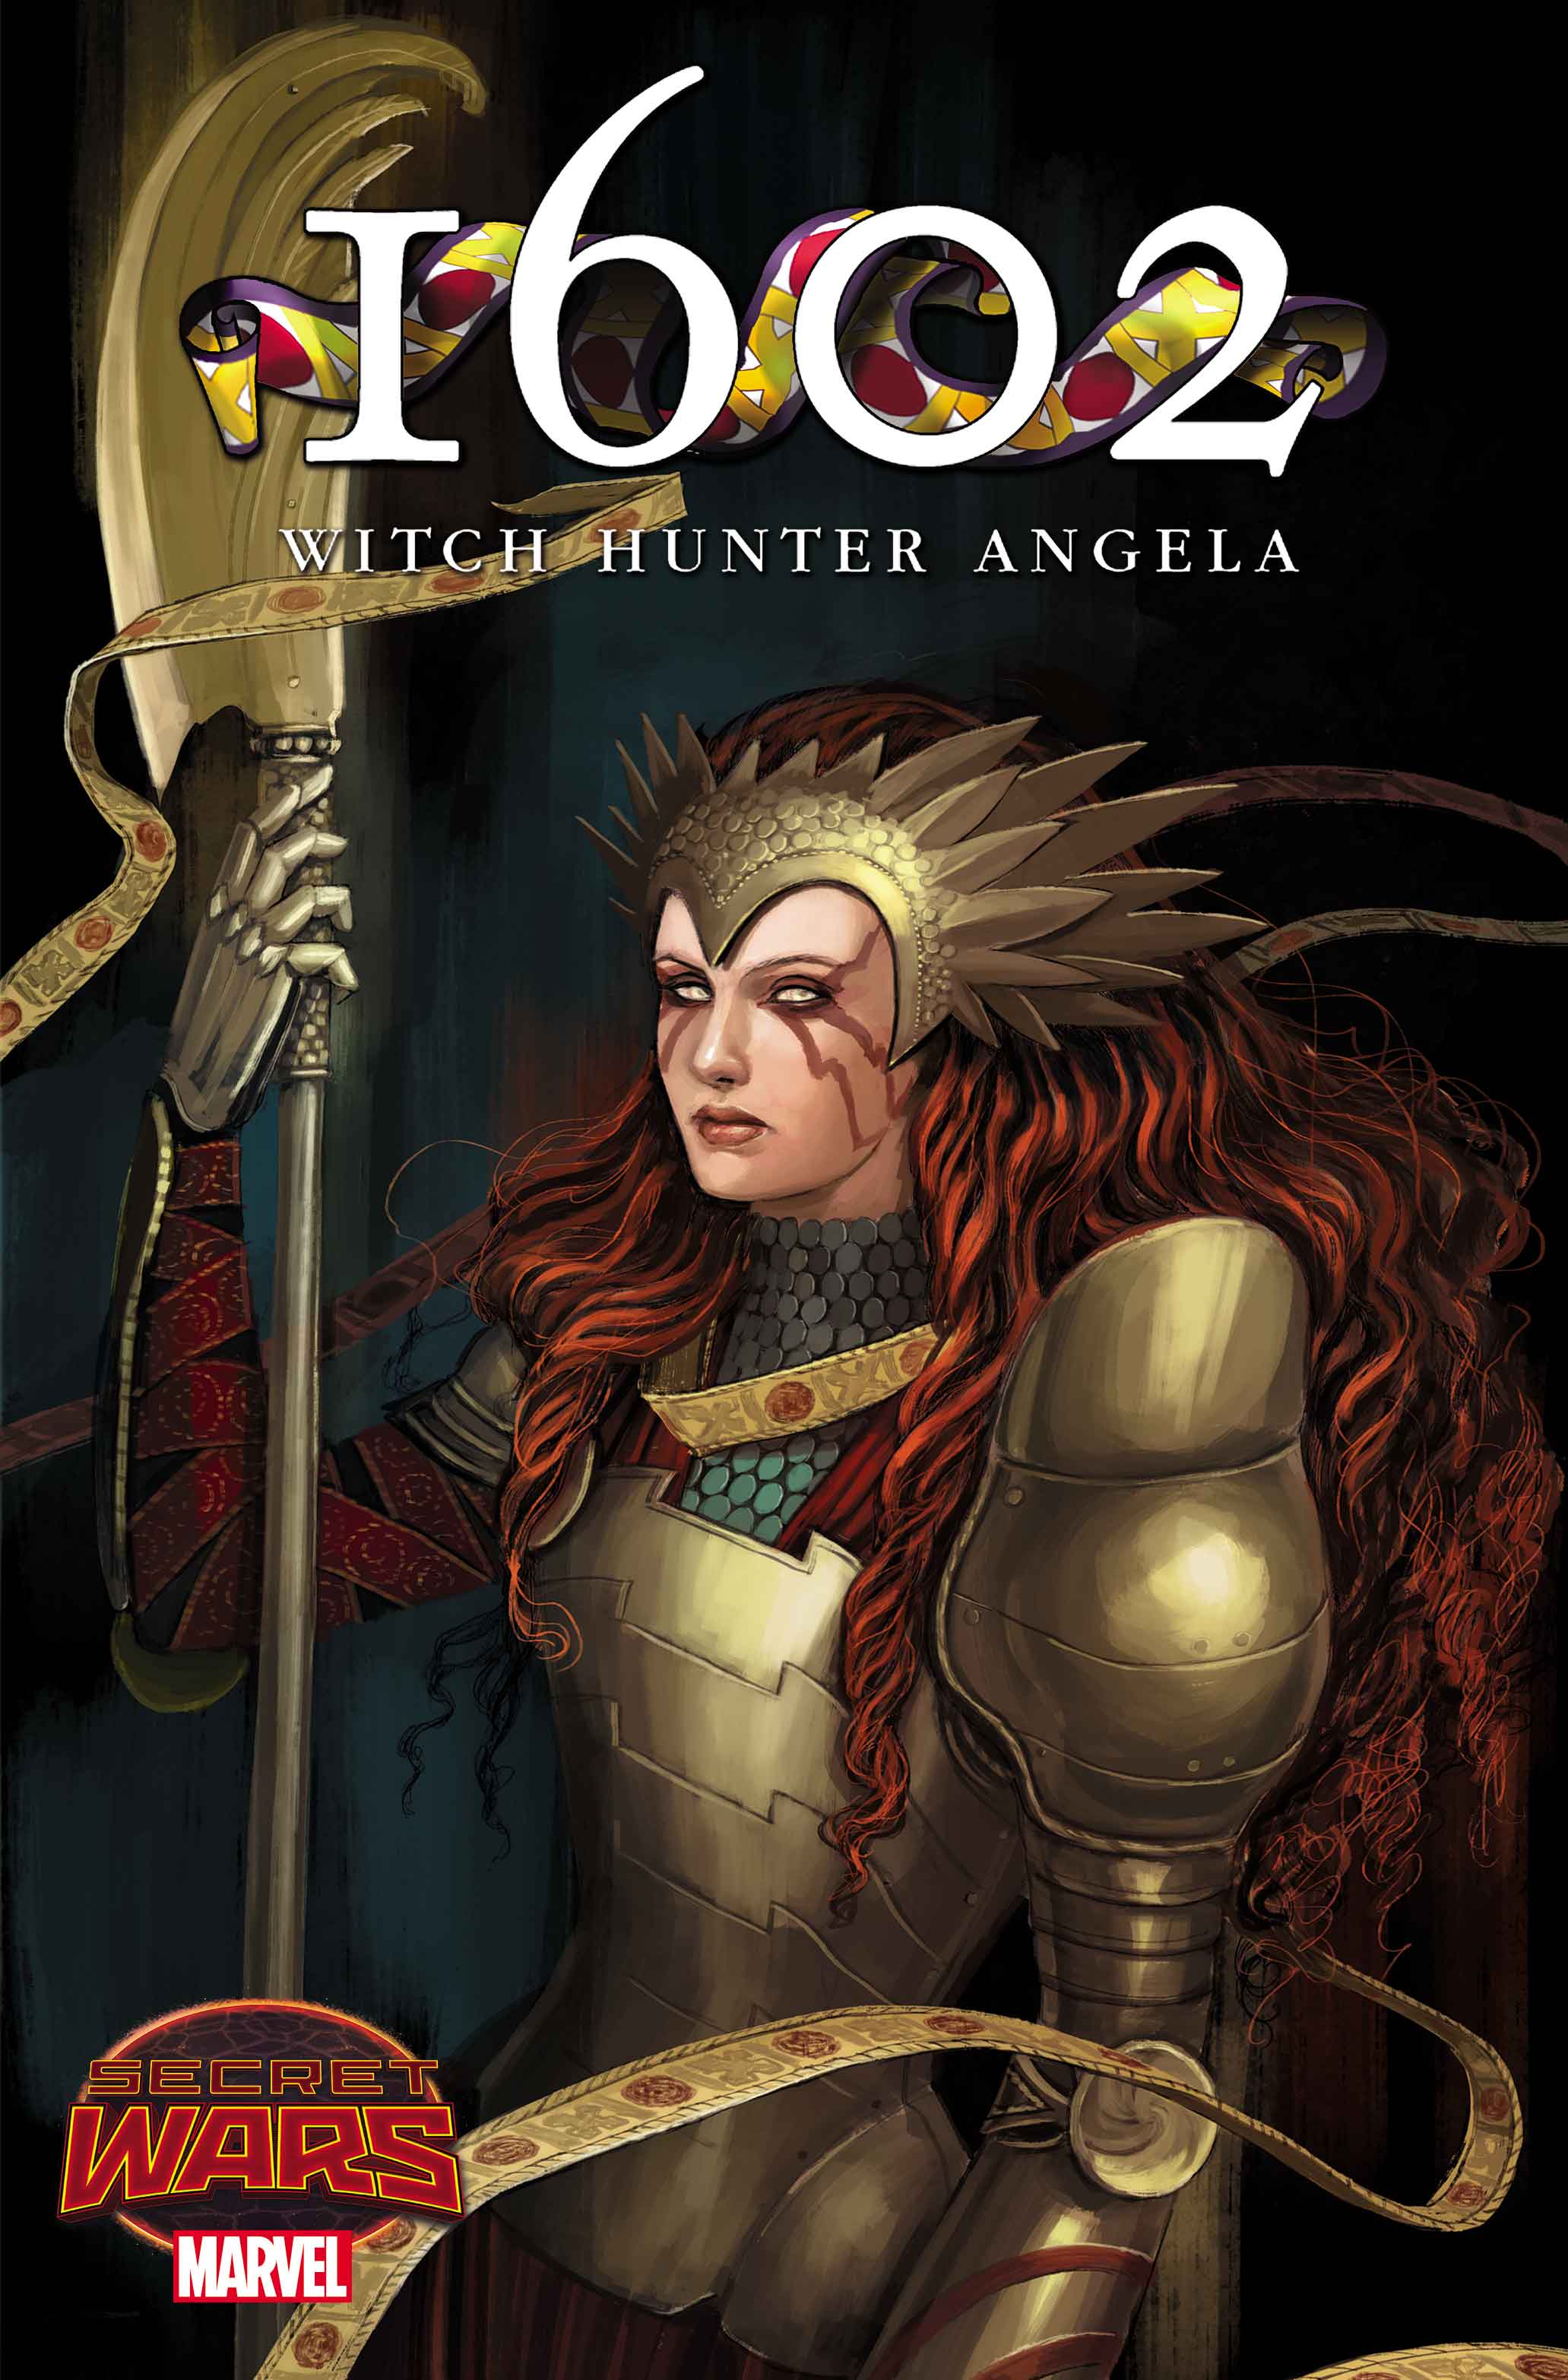 1602_Witch_Hunter_Angela_1_Cover